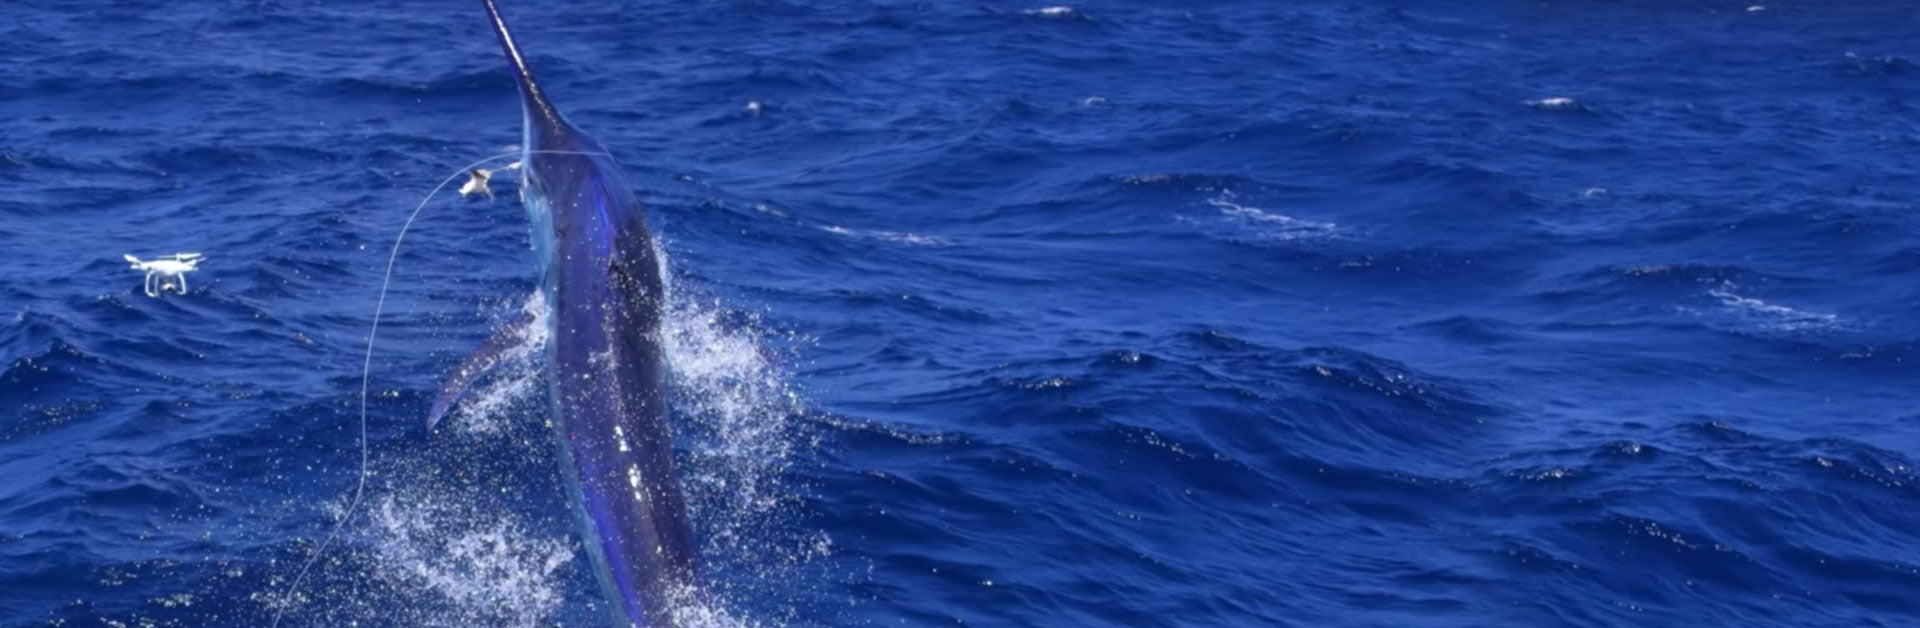 This Epic Black Marlin Footage Is One Of The Coolest Videos You’ll See